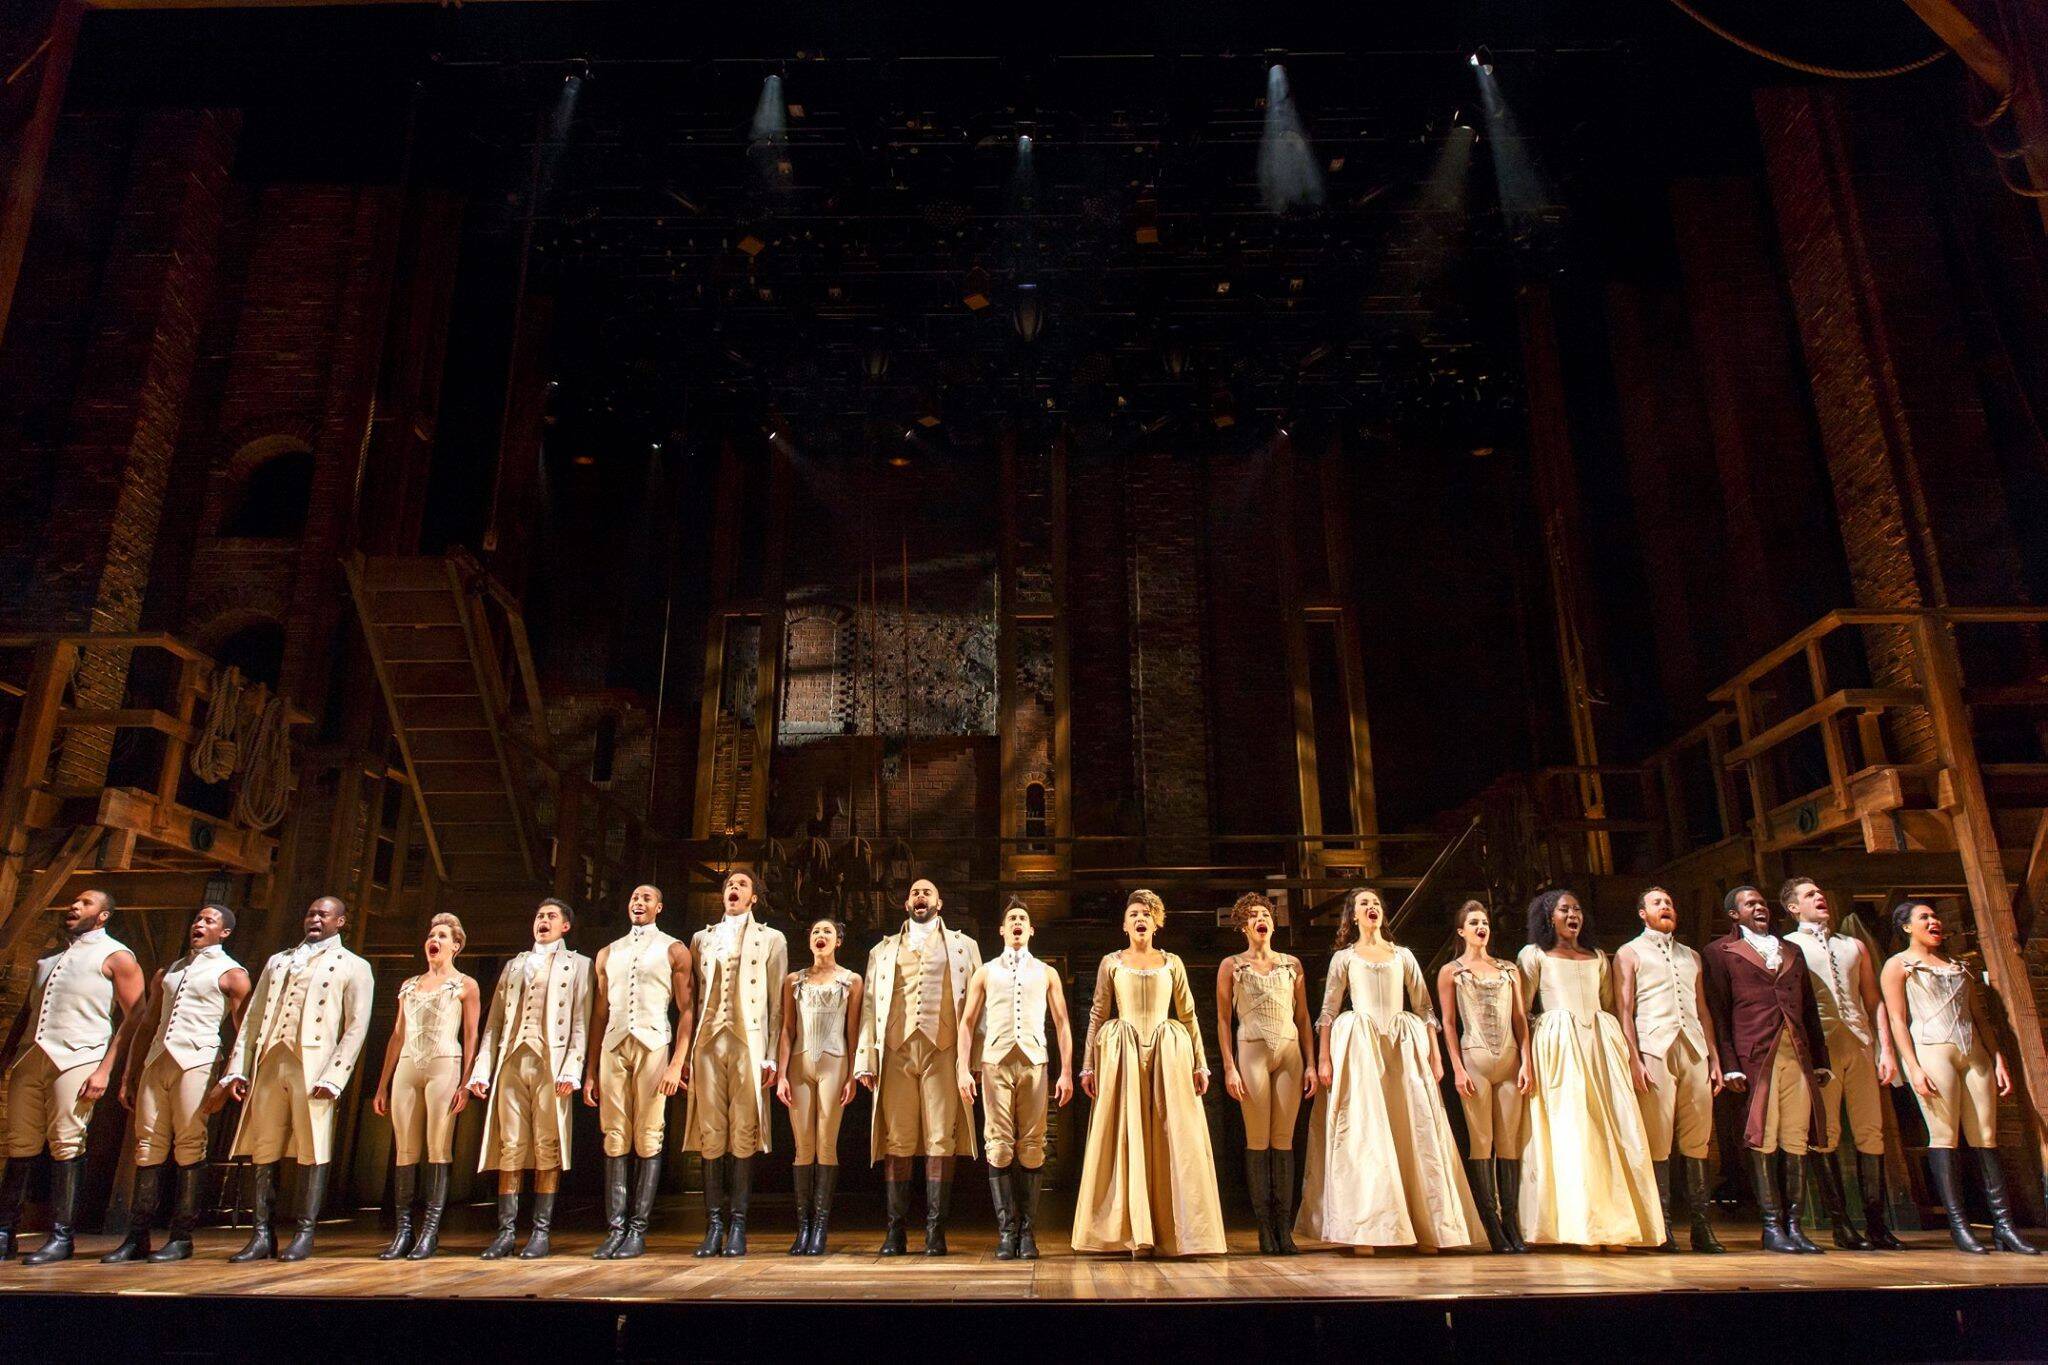 Hamilton the musical is finally coming to Toronto this winter